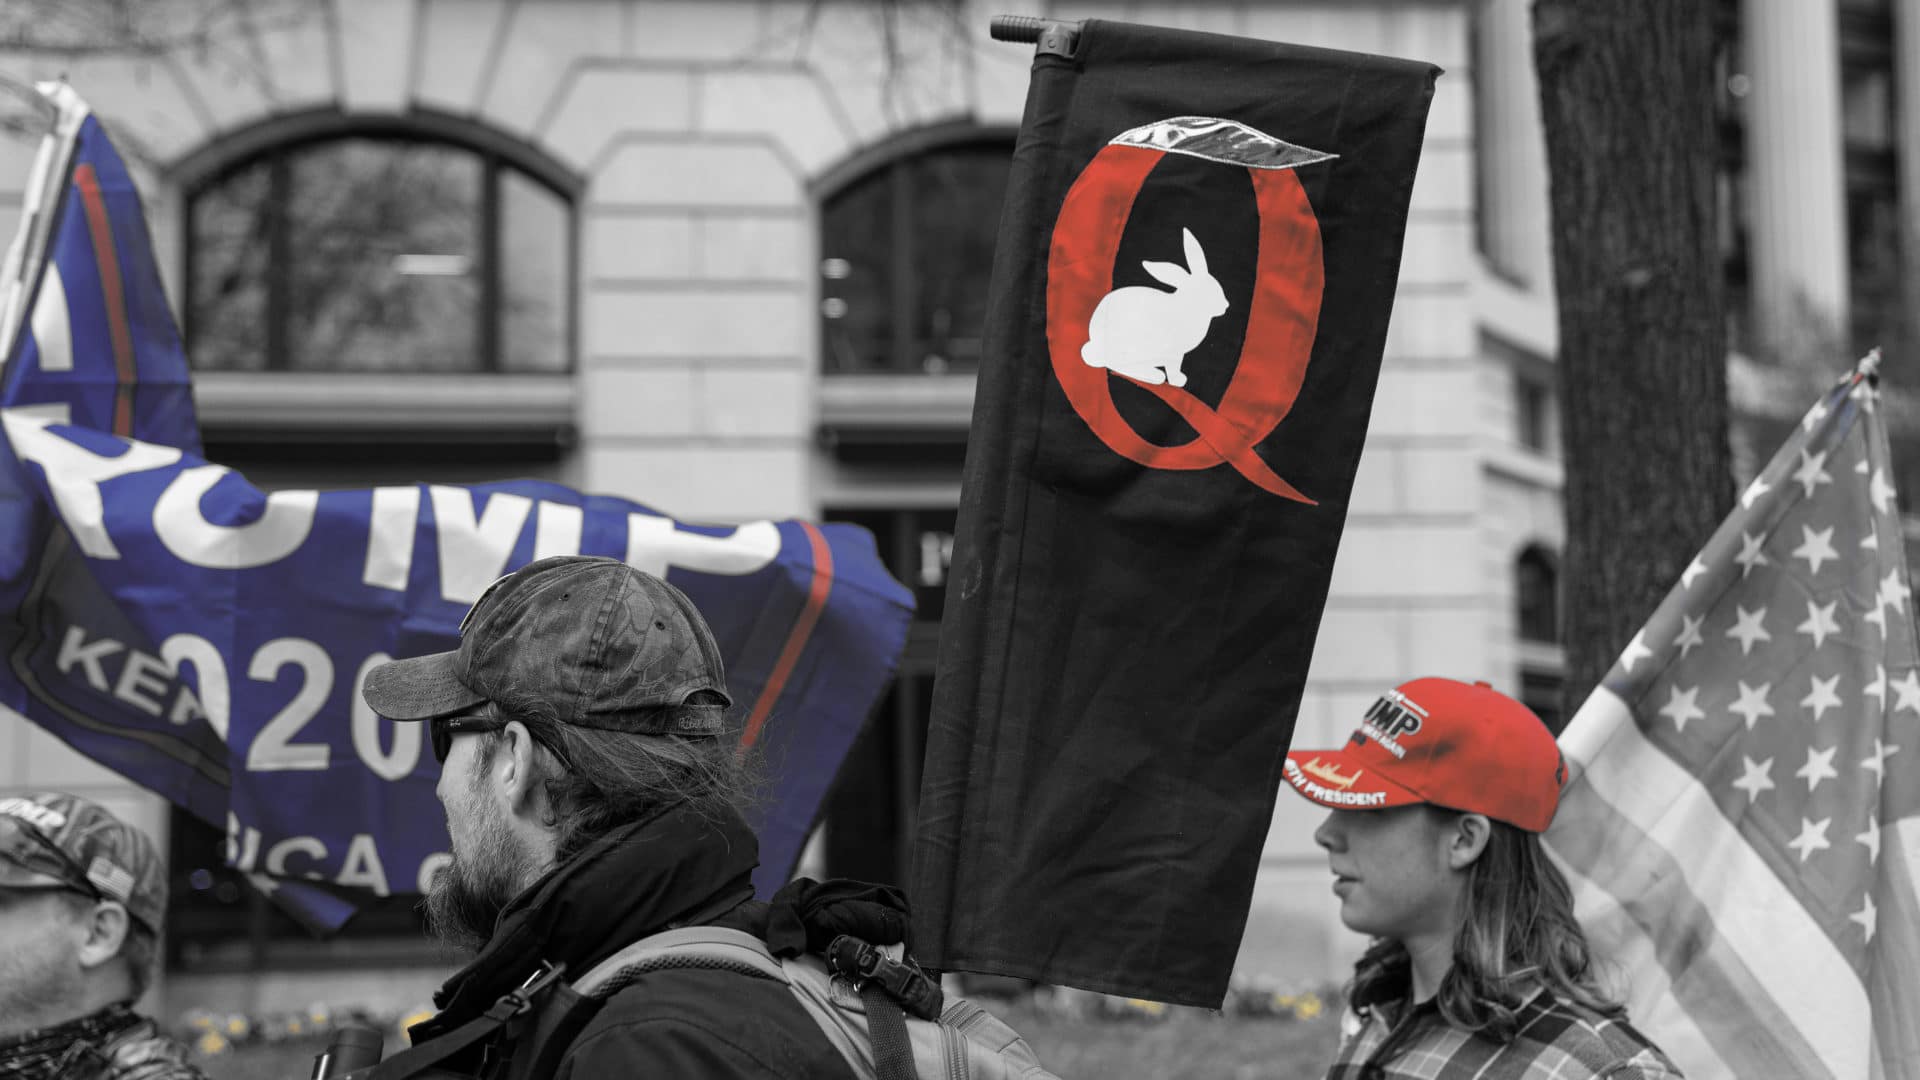 Trump supporters hold a QAnon sign at a rally on Jan 5, 2021. The next day, many supporters stormed the Capitol, temporarily stopping Congress from certifying the 2020 election.